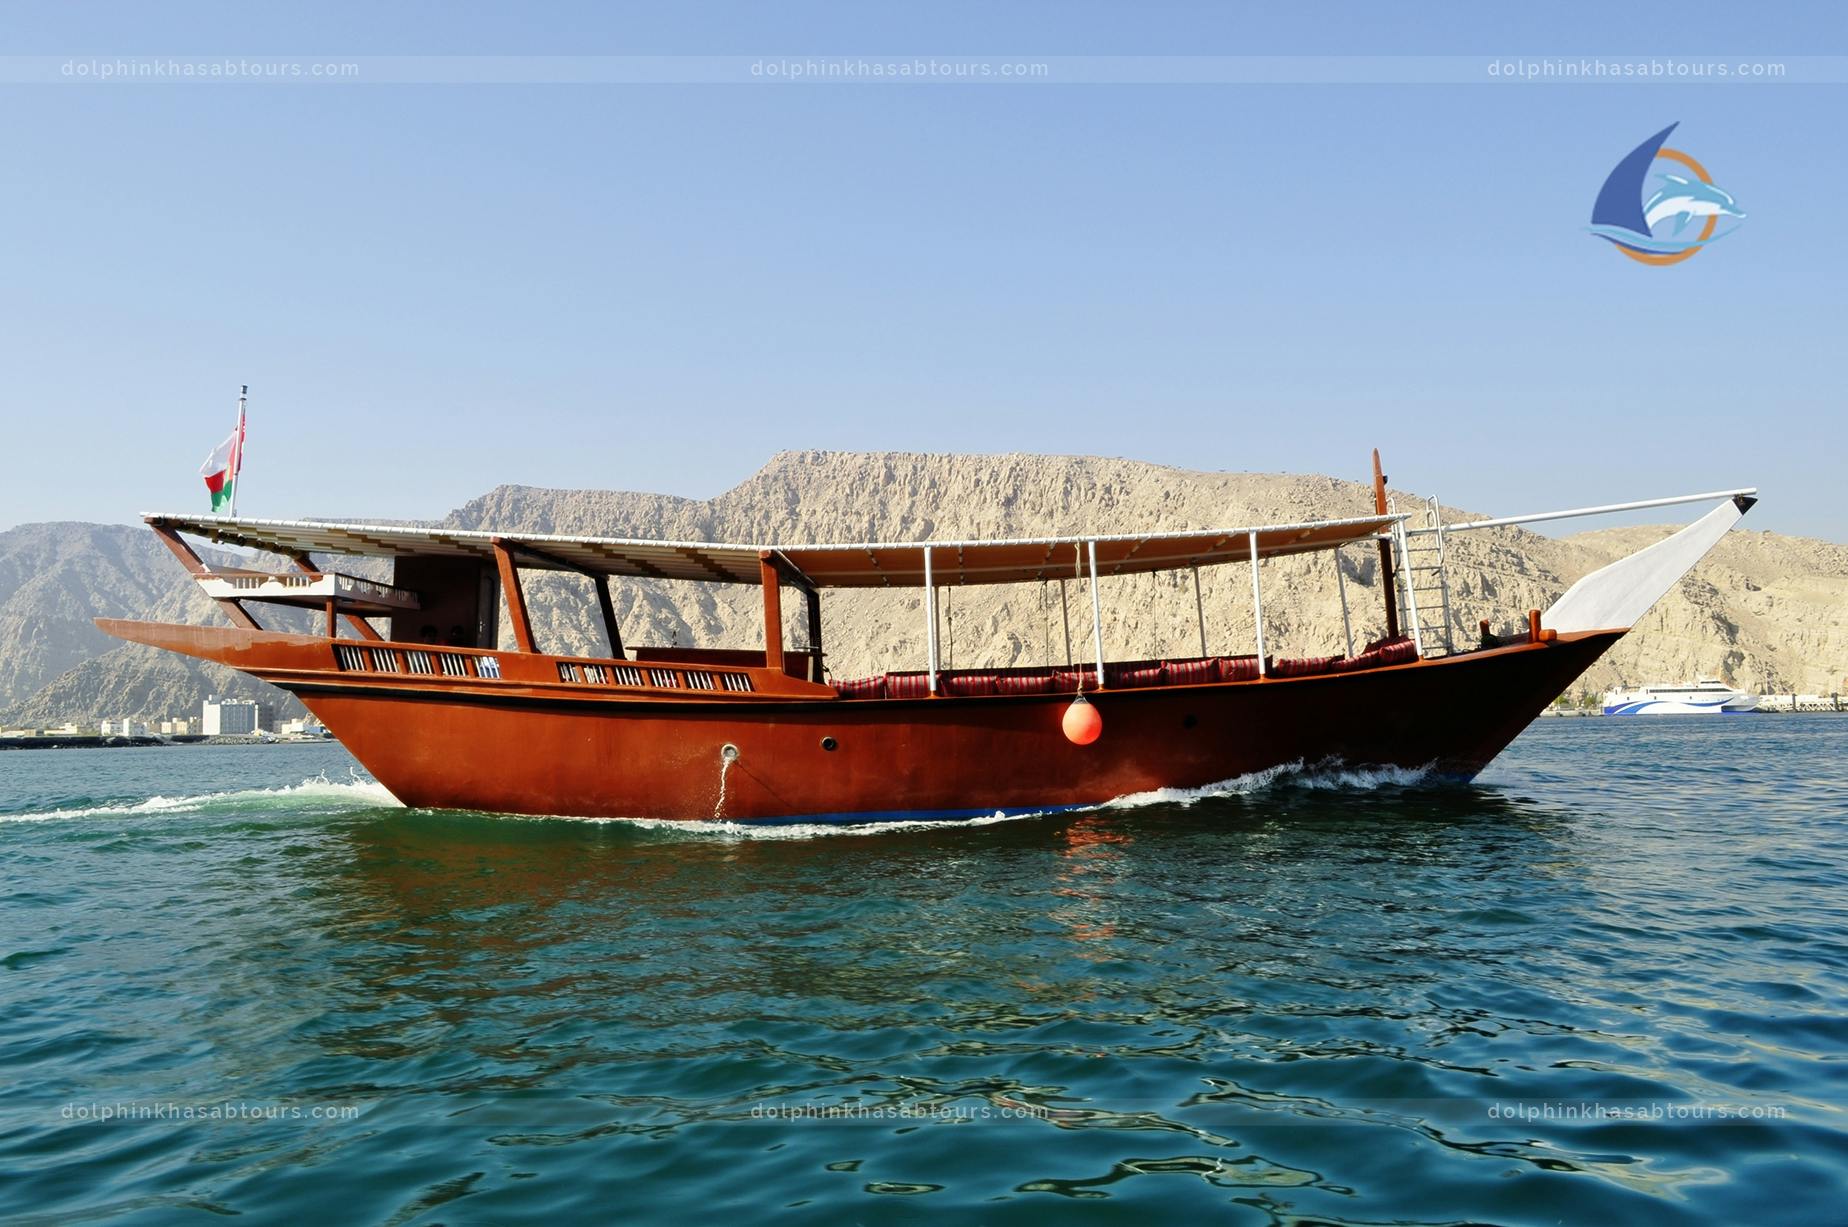 Full day dhow cruise with drinks and lunch to the Fjords of Musandam